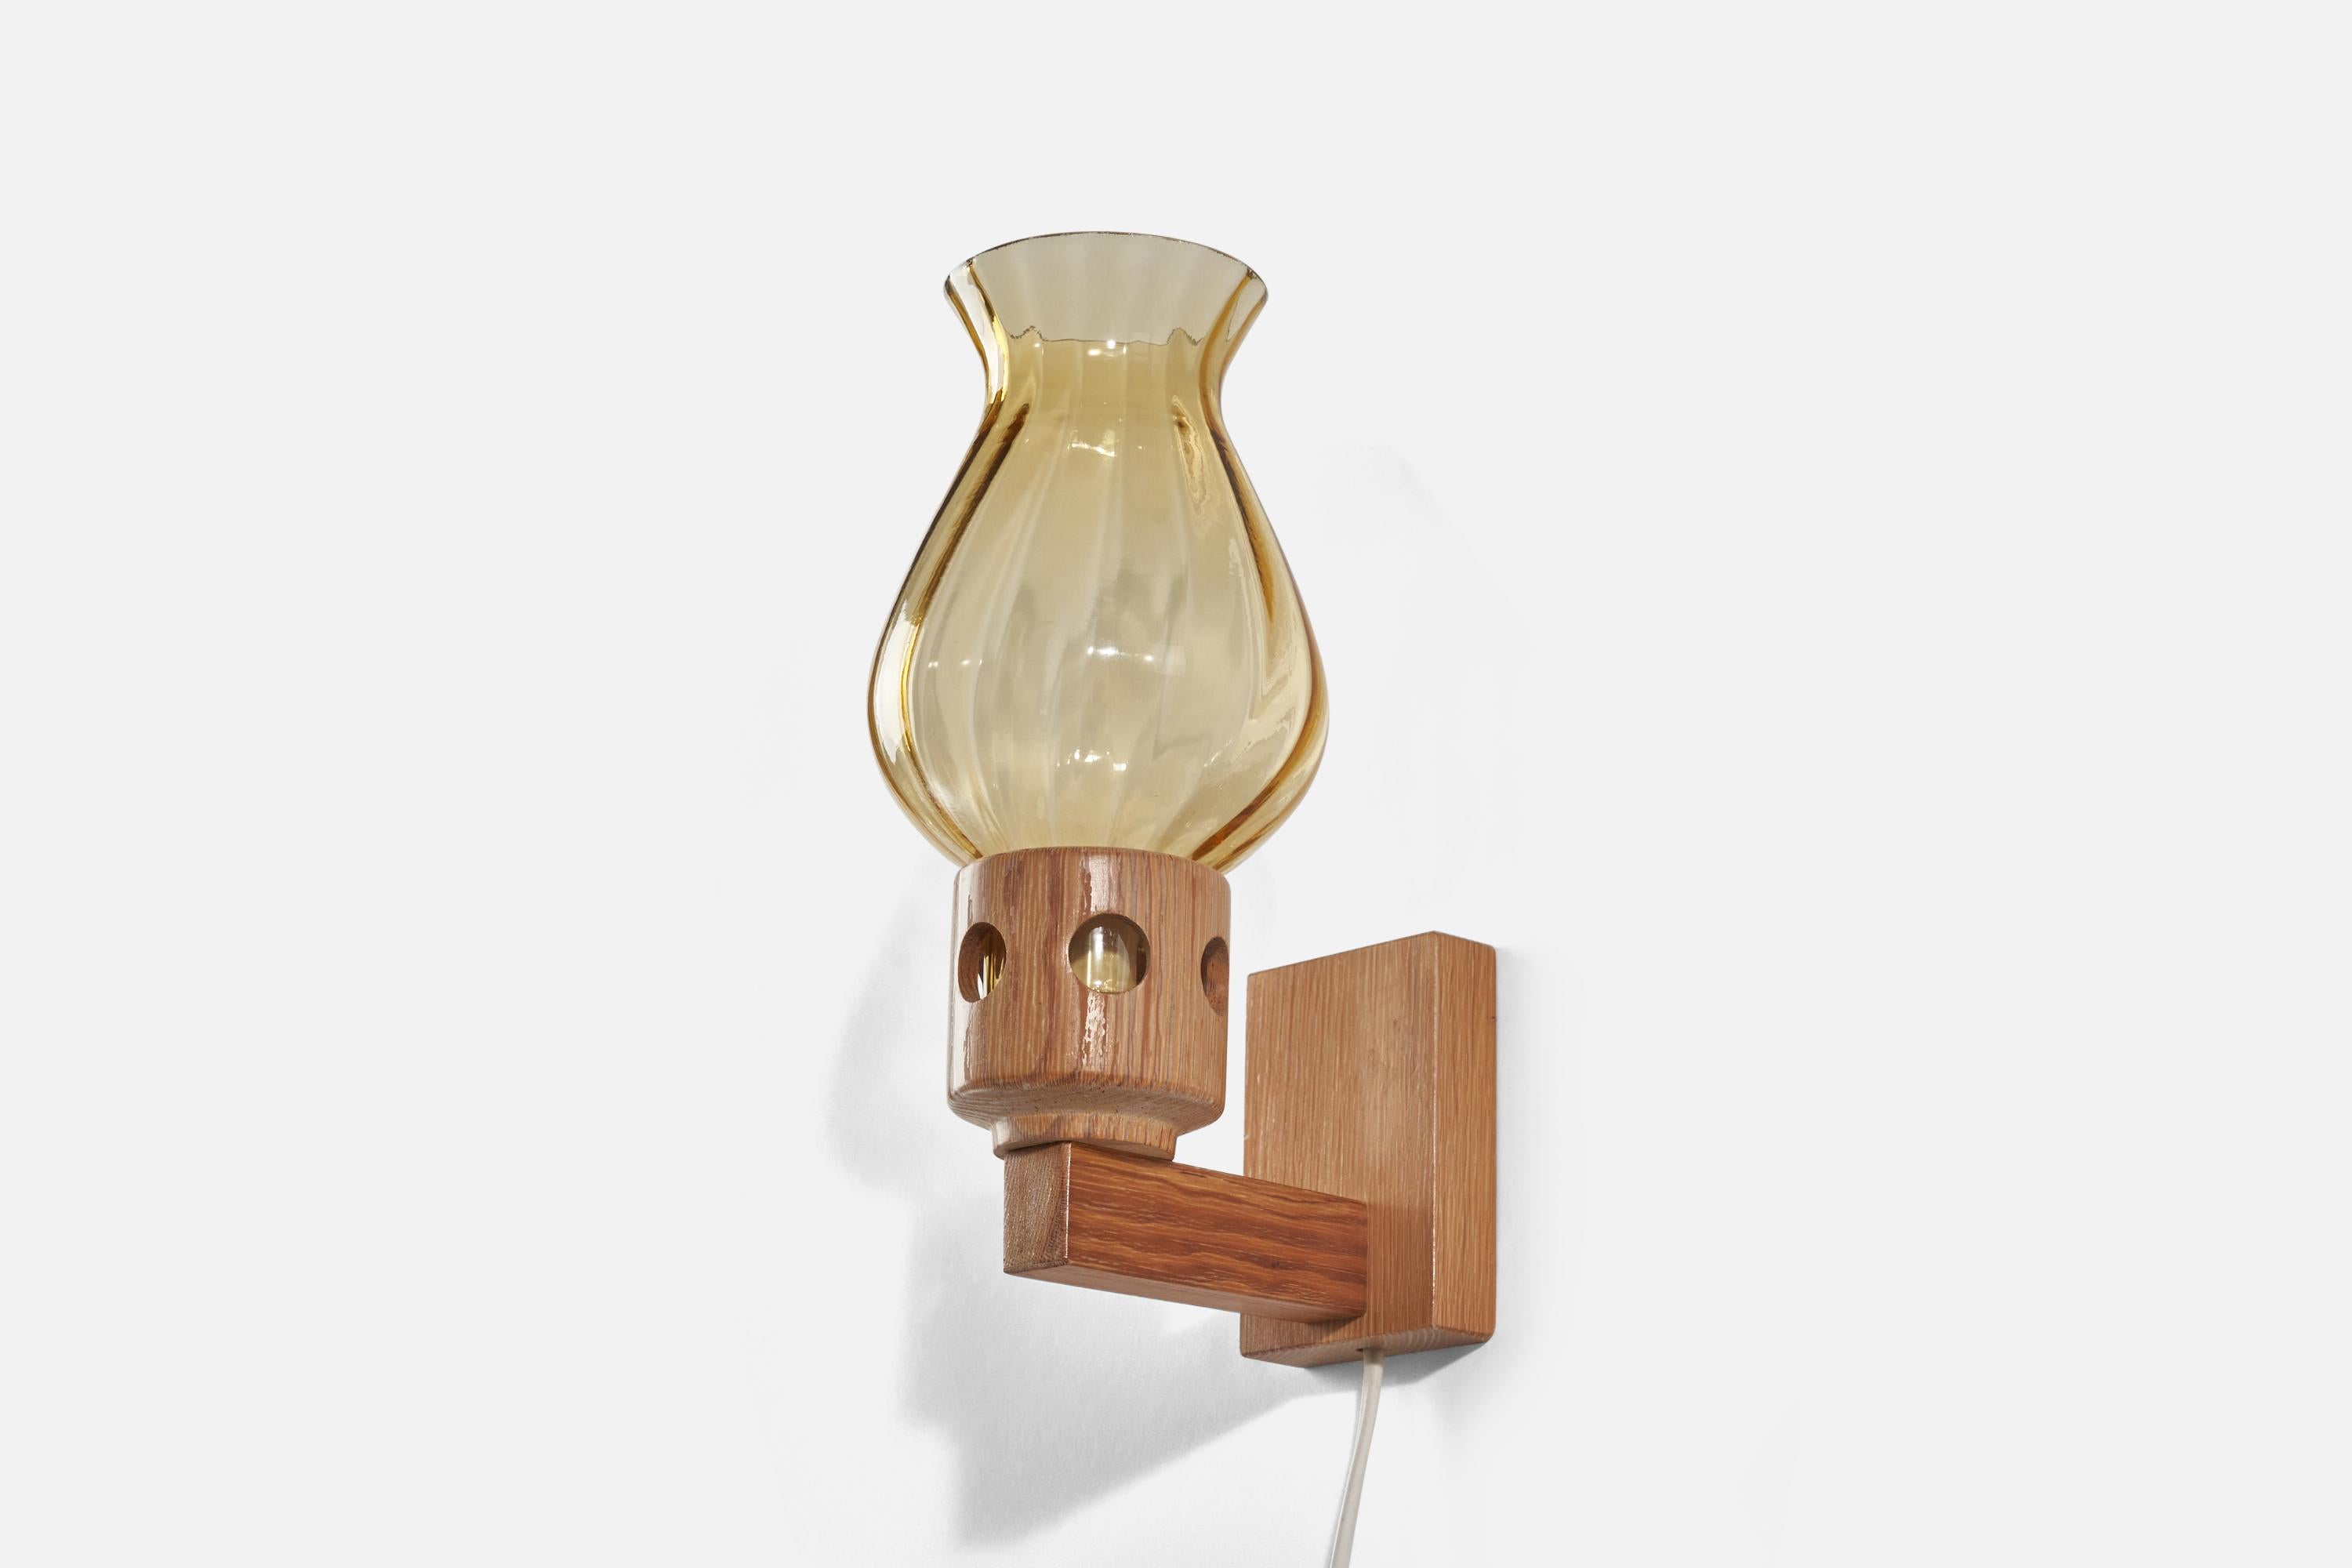 A pine and yellow glass sconce / wall light designed and produced in Sweden, 1970s.

Dimensions of back plate (inches) : 3.54 x 2.44 x 0.80 (height x width x depth)

Socket takes E-14 bulb.

There is no maximum wattage stated on the fixture.